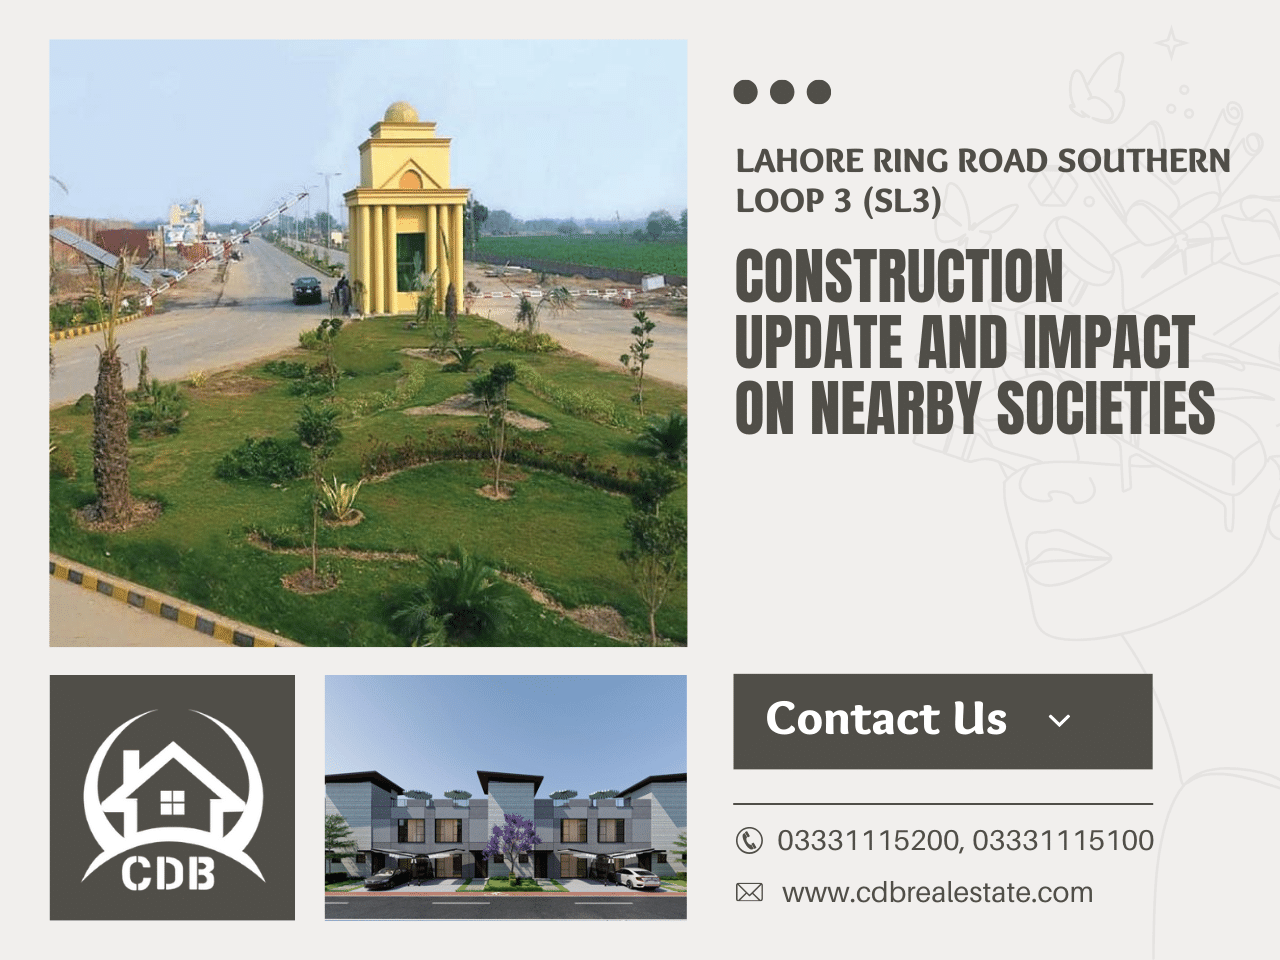 Lahore Ring Road Southern Loop 3 (SL3): Construction Update and Impact on Nearby Societies